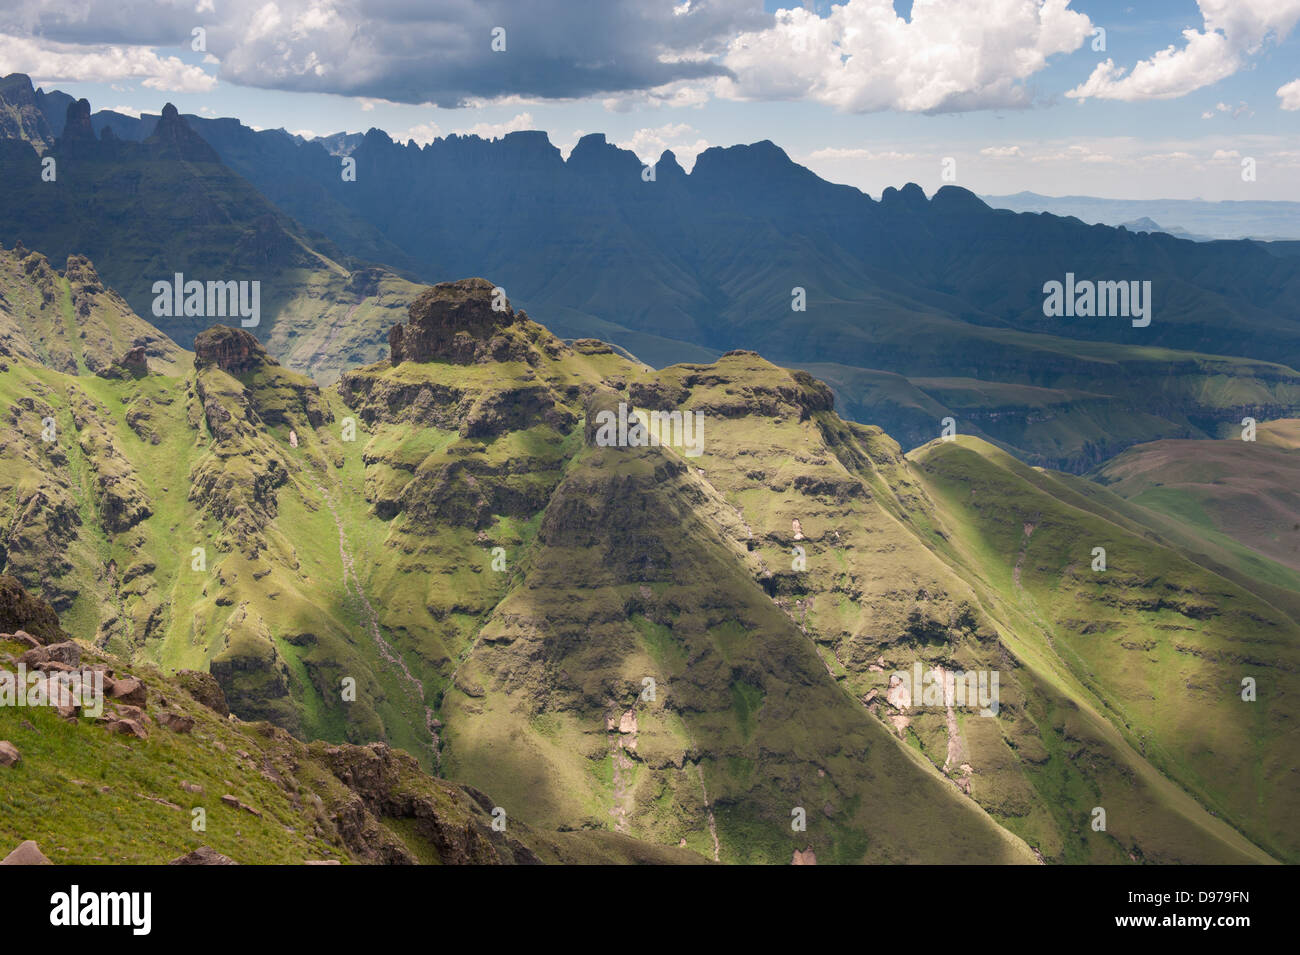 View from the top of Organ Pipes Pass, Ukhahlamba Drakensberg Park, South Africa Stock Photo